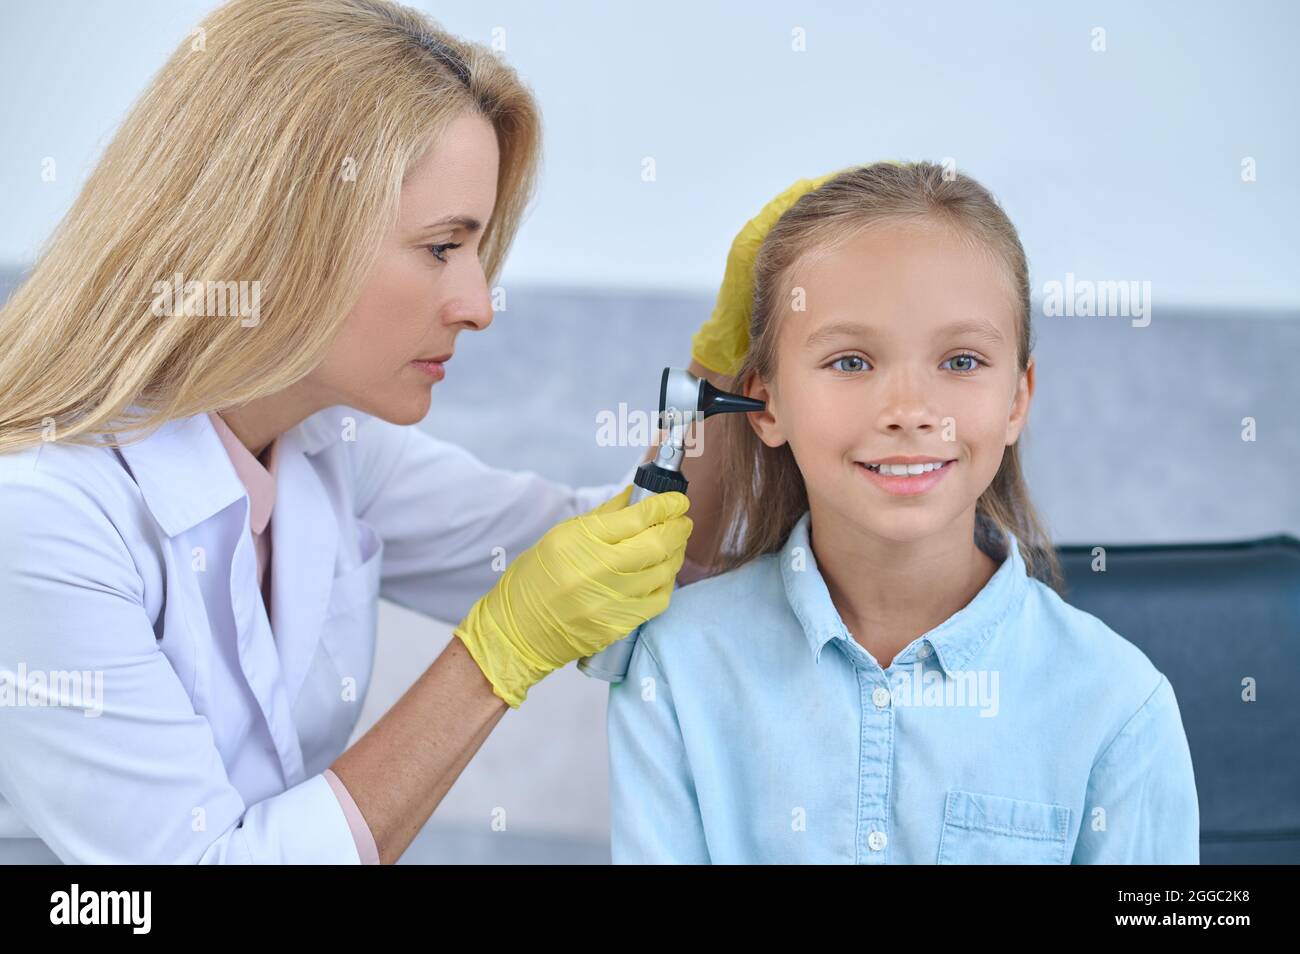 Doctor examining the young girls ear with a medical device Stock Photo